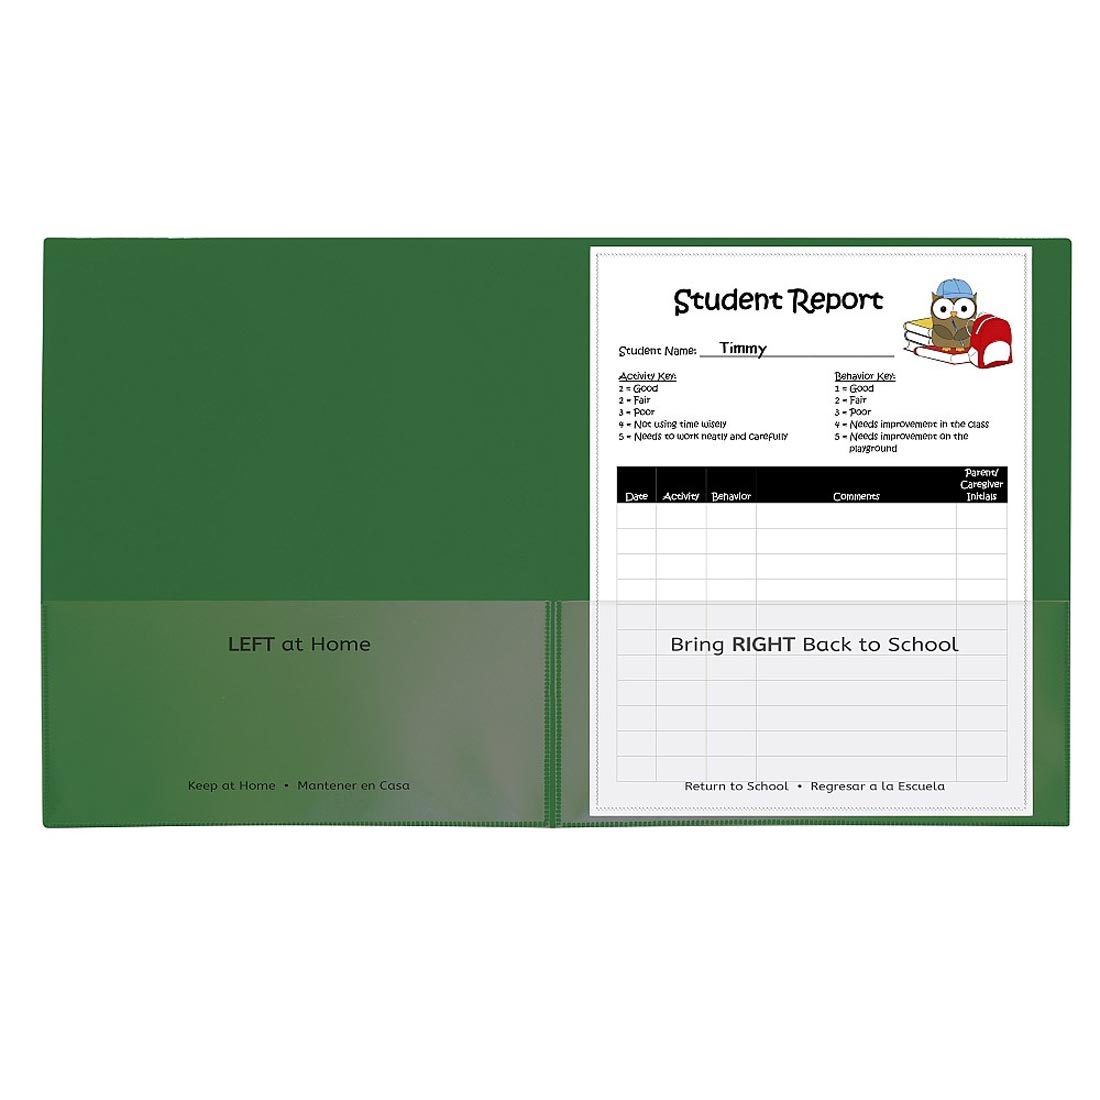 Green Classroom Connector School-to-Home Folder has Left At Home on the left pocket and Bring Right Back to School on the right pocket